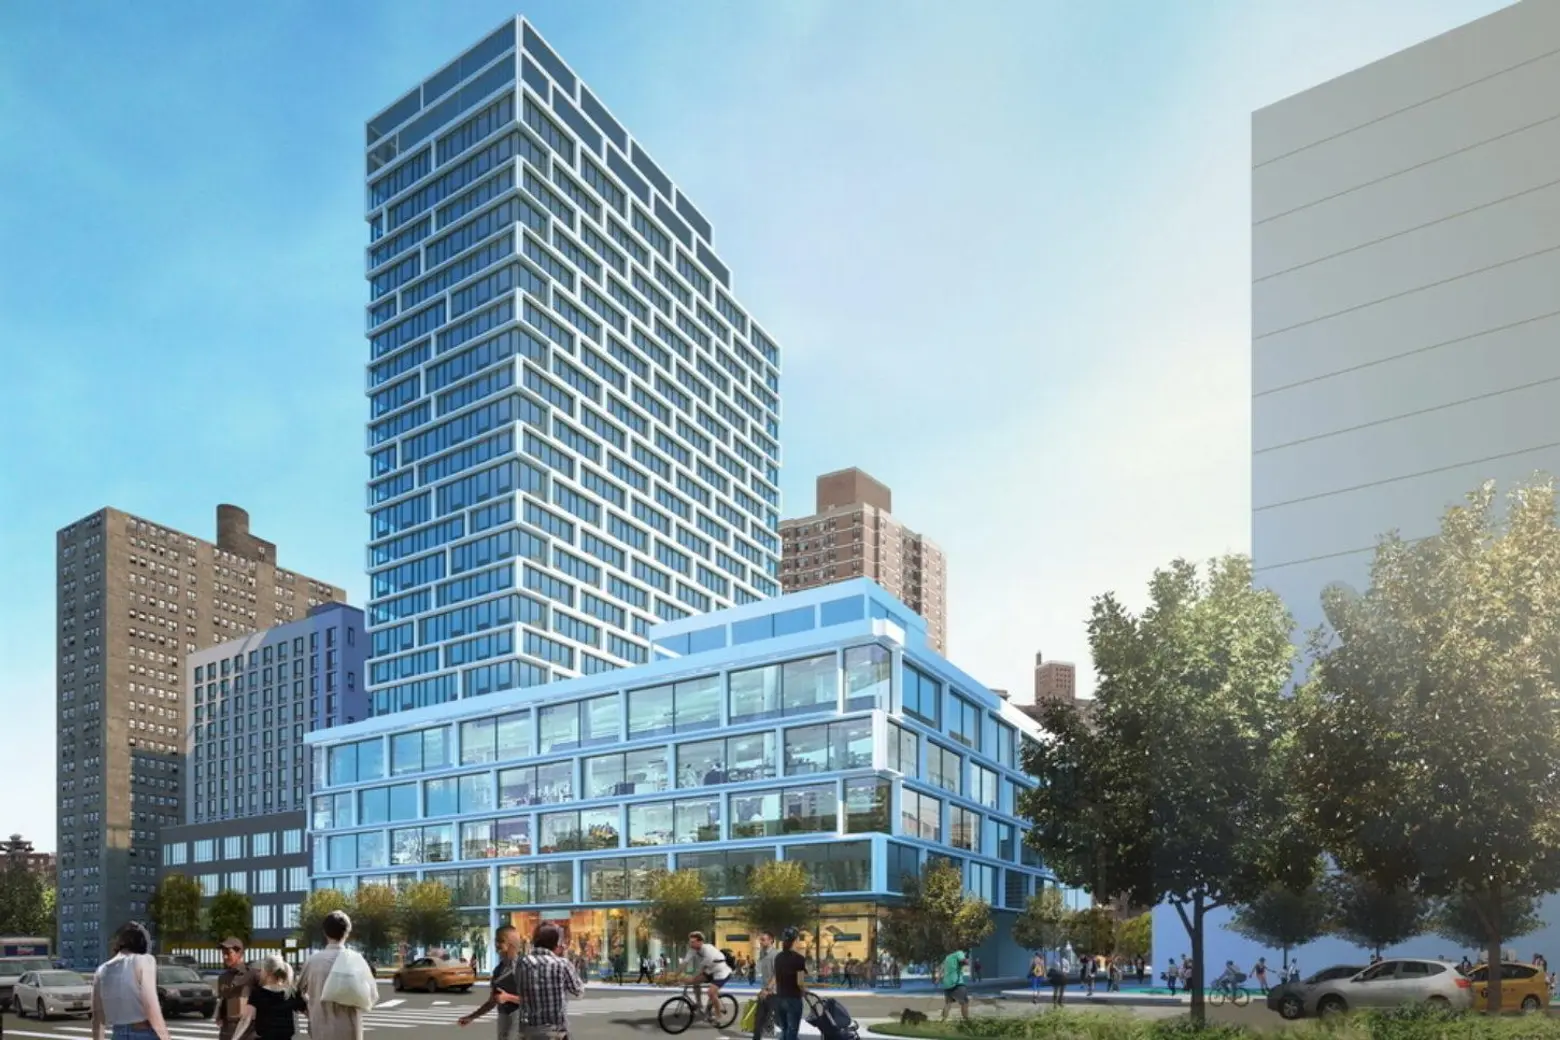 Construction kicks off for Handel Architects’ mixed-use tower at Essex Crossing